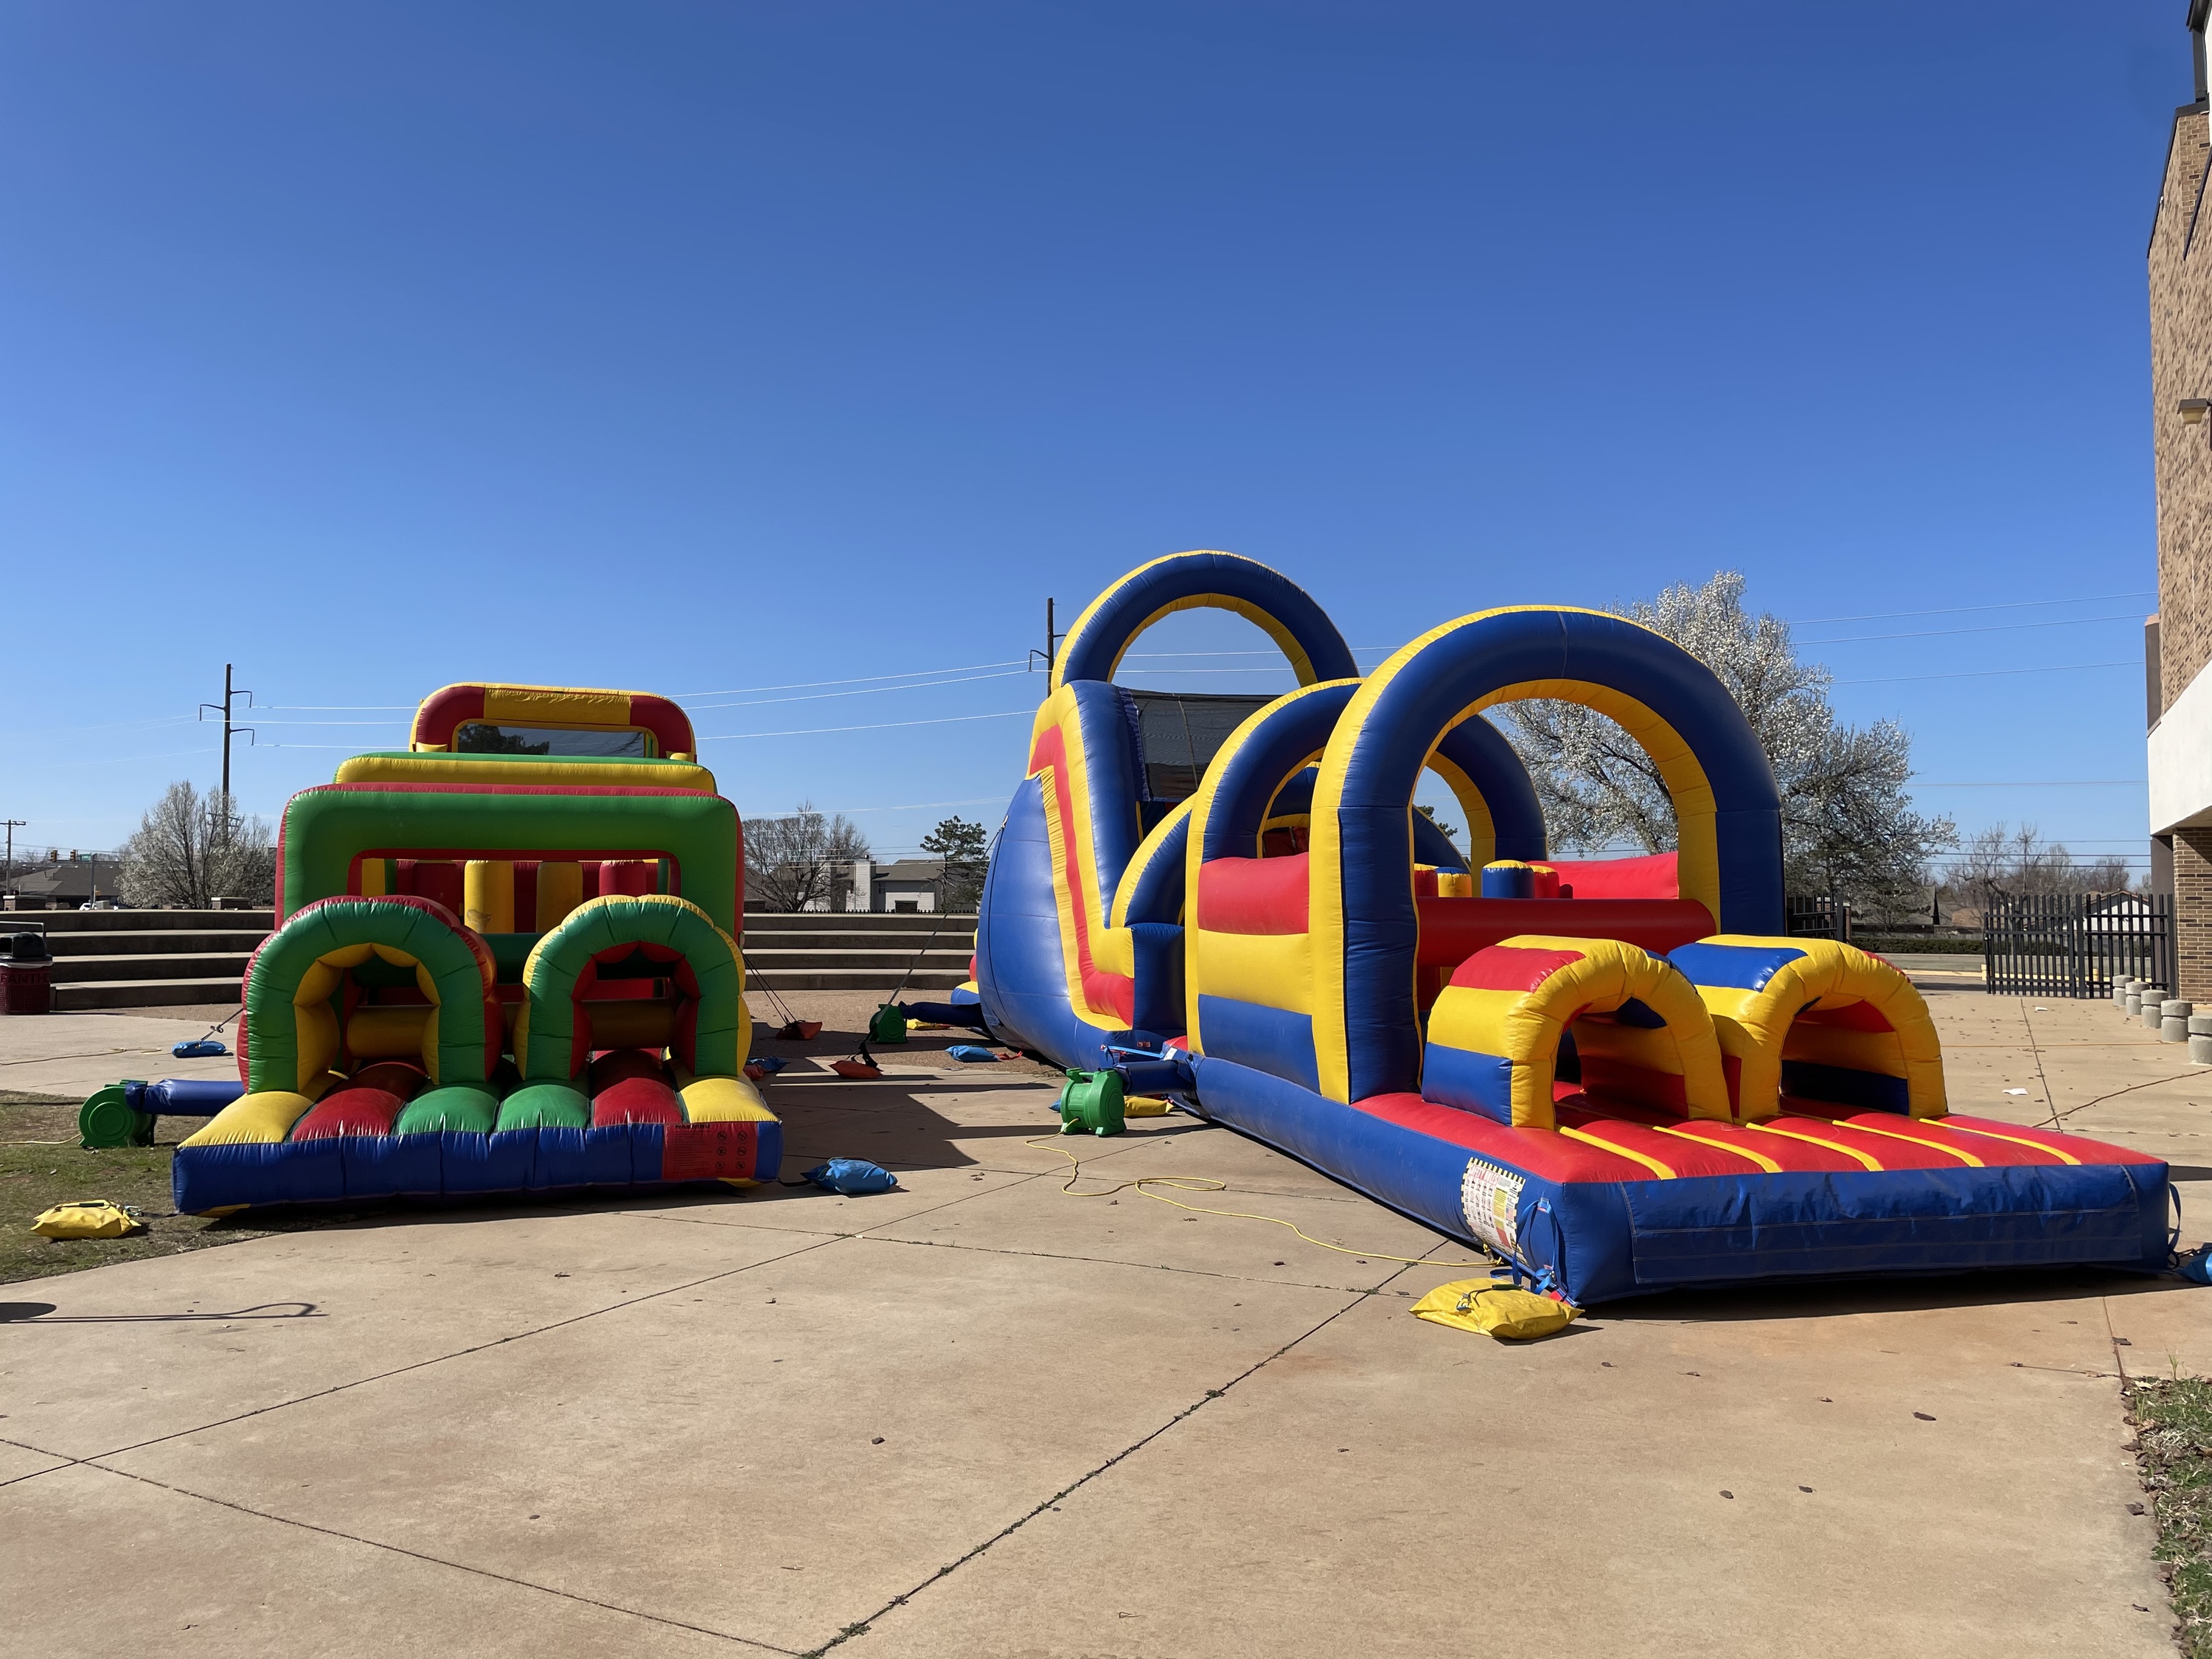 The Bounce House Rental Oklahoma City Uses at Events Year-Round